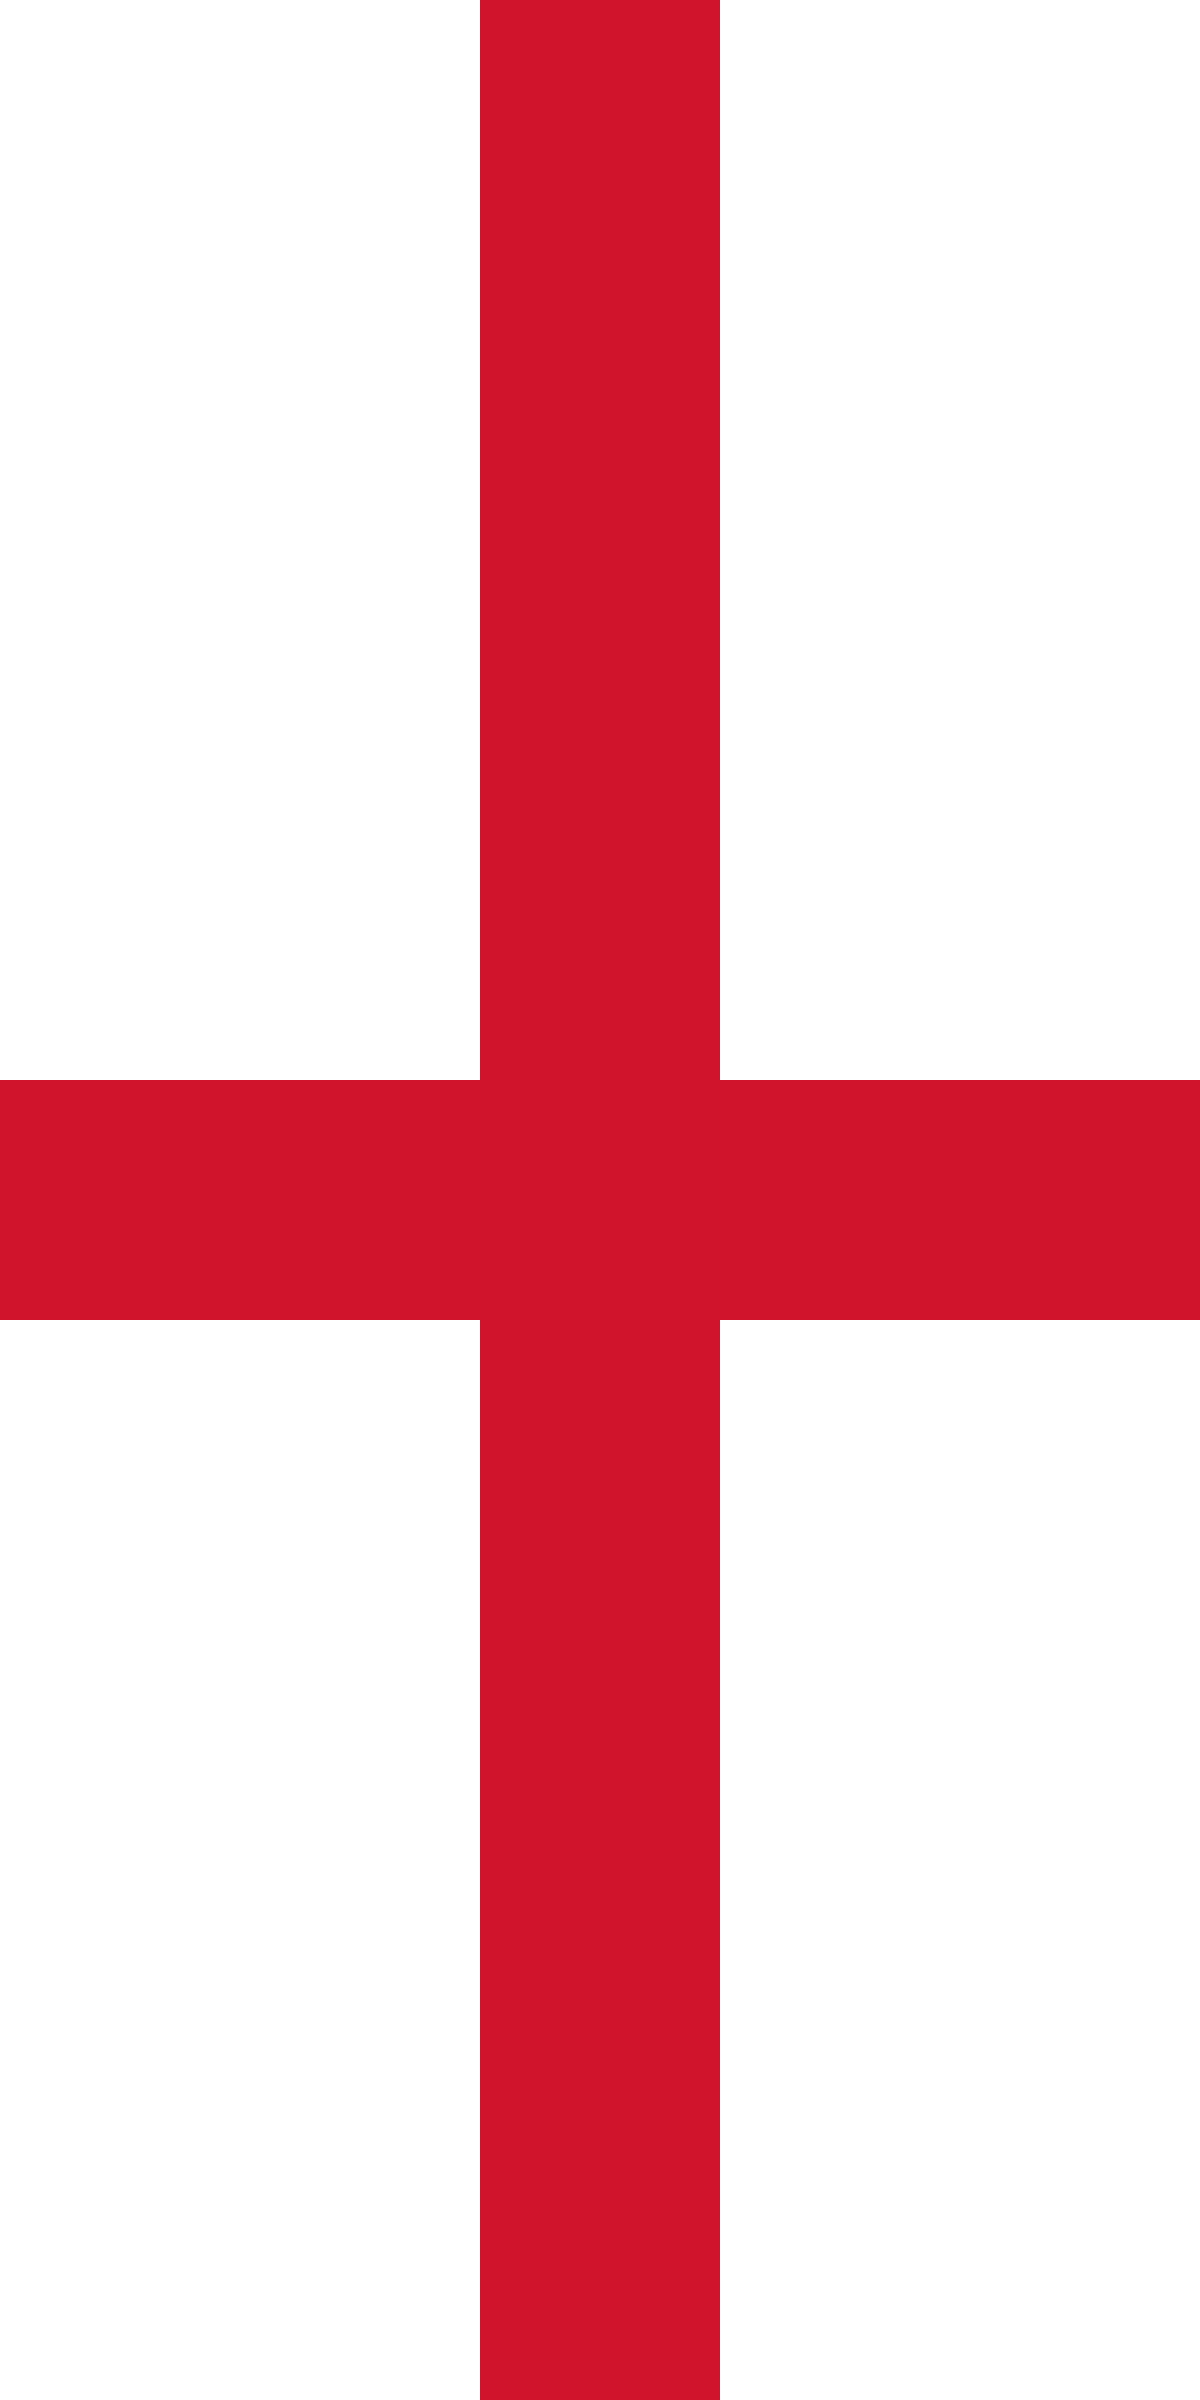 Download File:Flag of England (vertical).svg - Wikimedia Commons